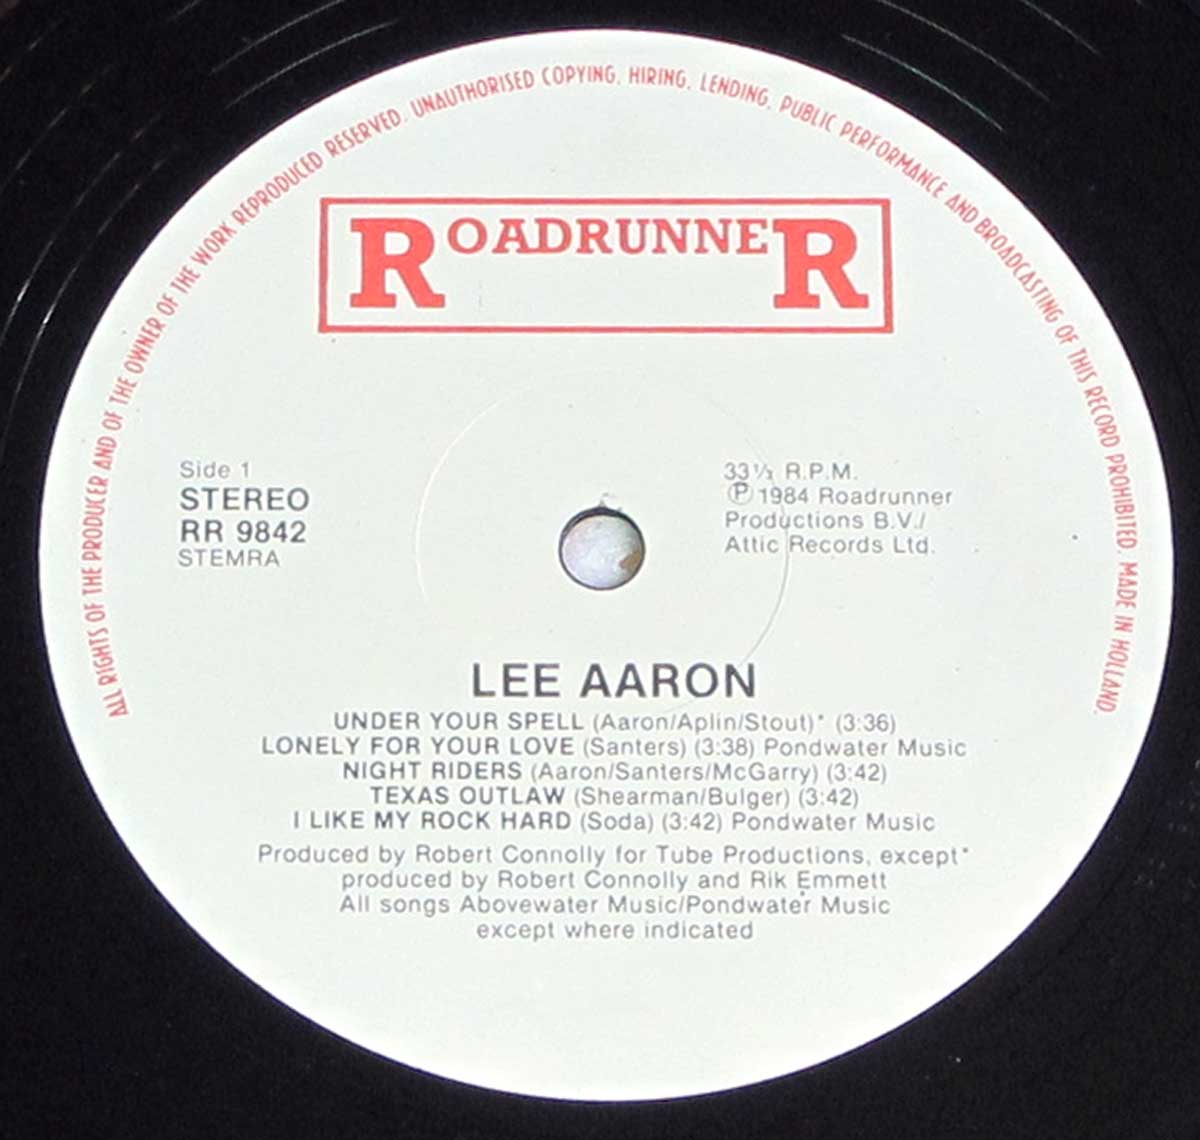 Enlarged High Resolution Photo of the Record's label Lee Aaron debut + bonus track https://vinyl-records.nl